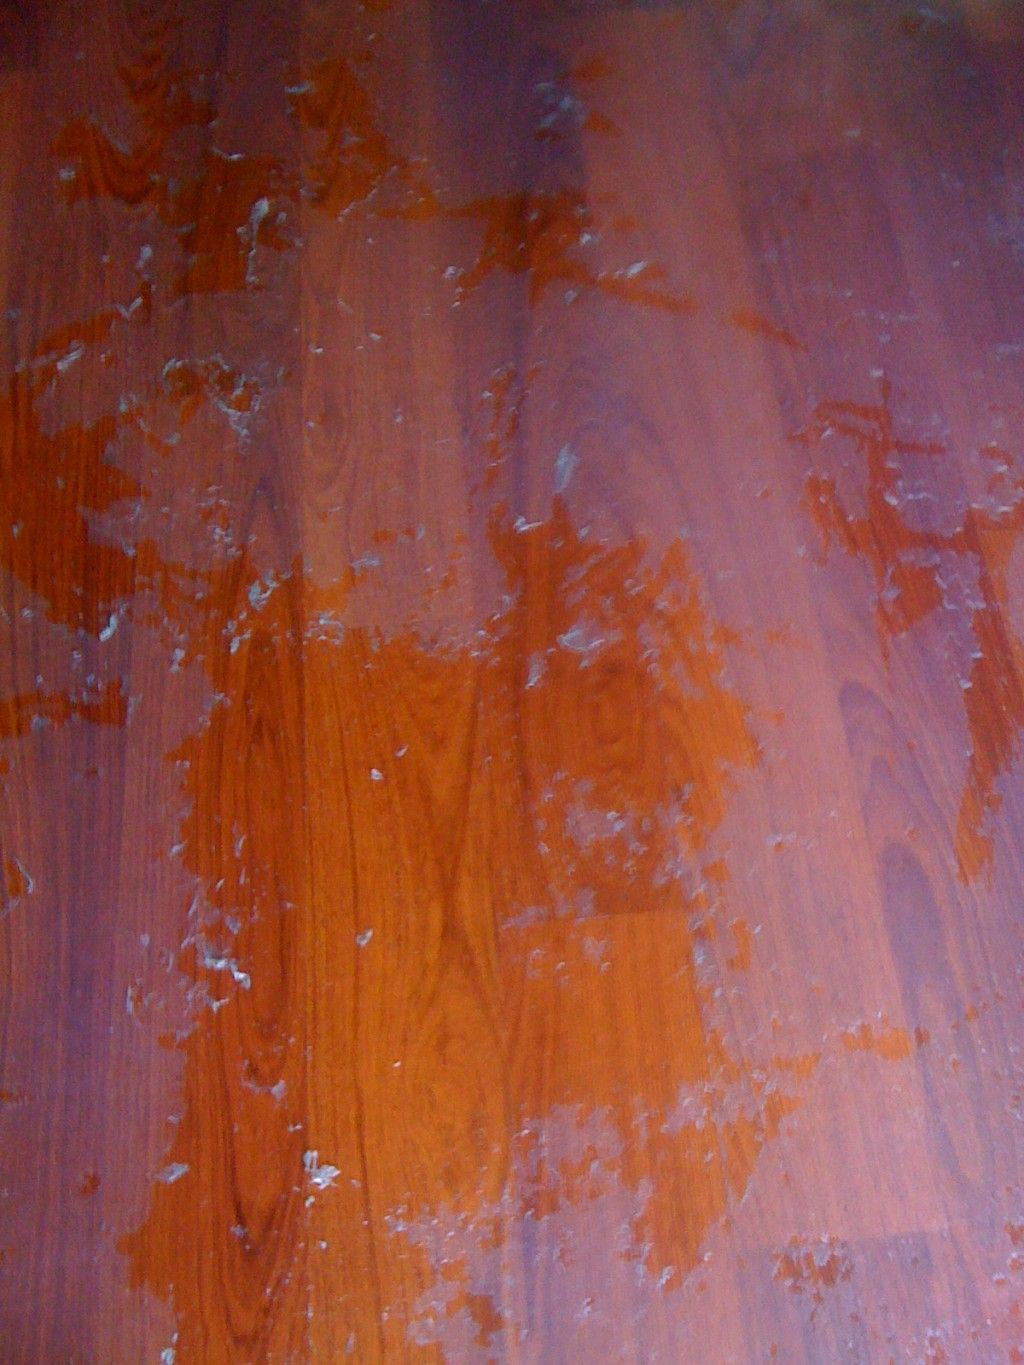 Best Hardwood Floor Scrubber Of How to Remove Wax and Oil soap Cleaners From Wood Floors Recipes with How to Remove Oily or Wax Build Up From Cleaning or Polishing solutions From Wood Floors